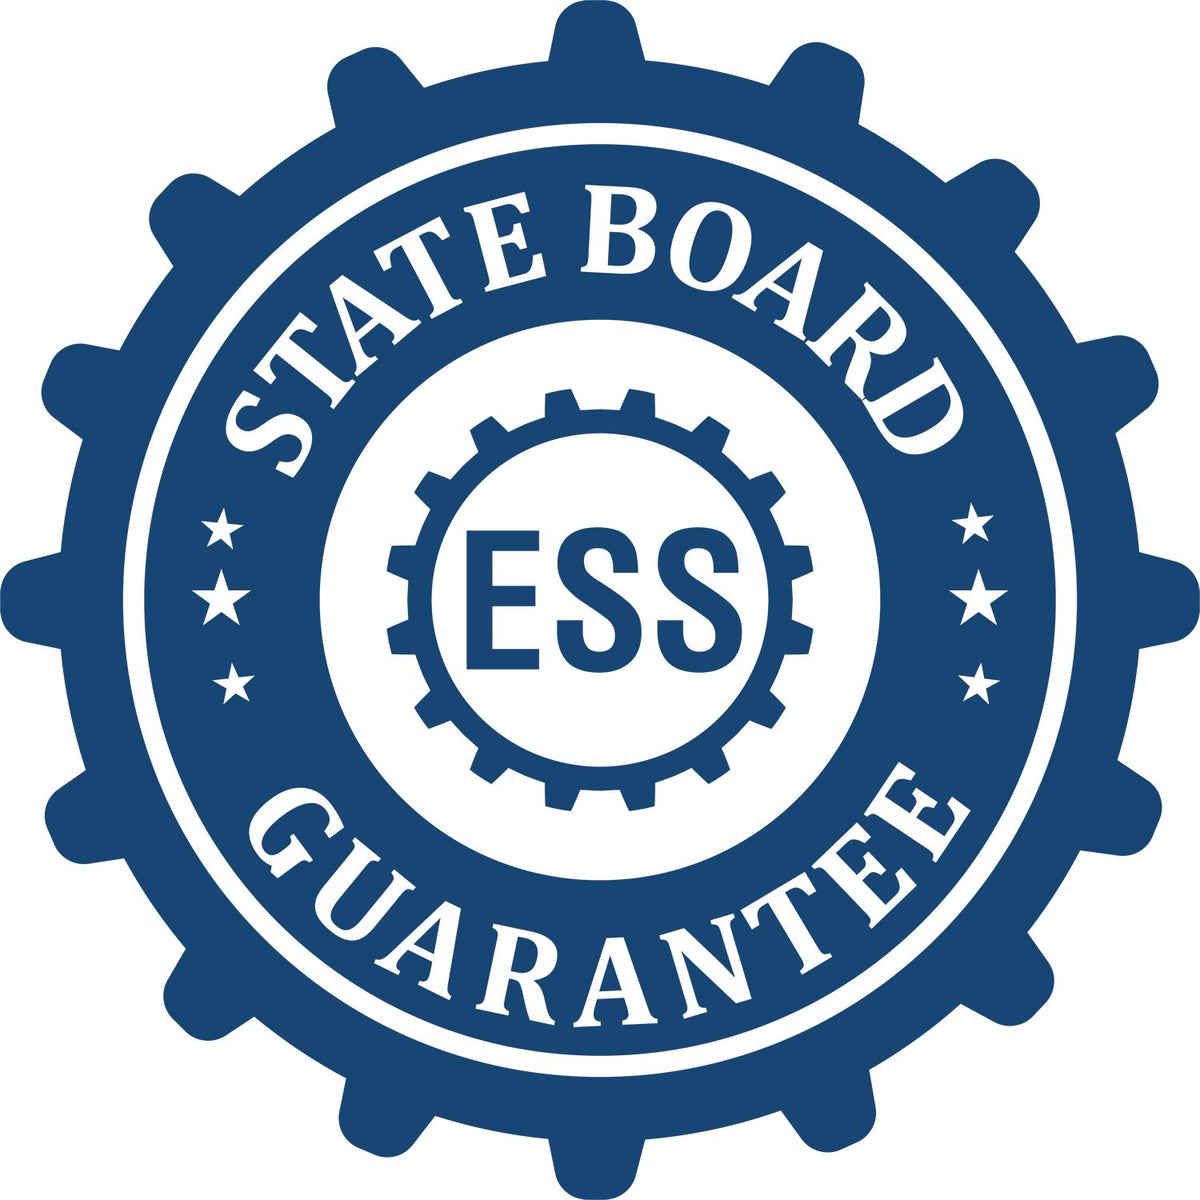 An emblem in a gear shape illustrating a state board guarantee for the Hybrid Montana Landscape Architect Seal